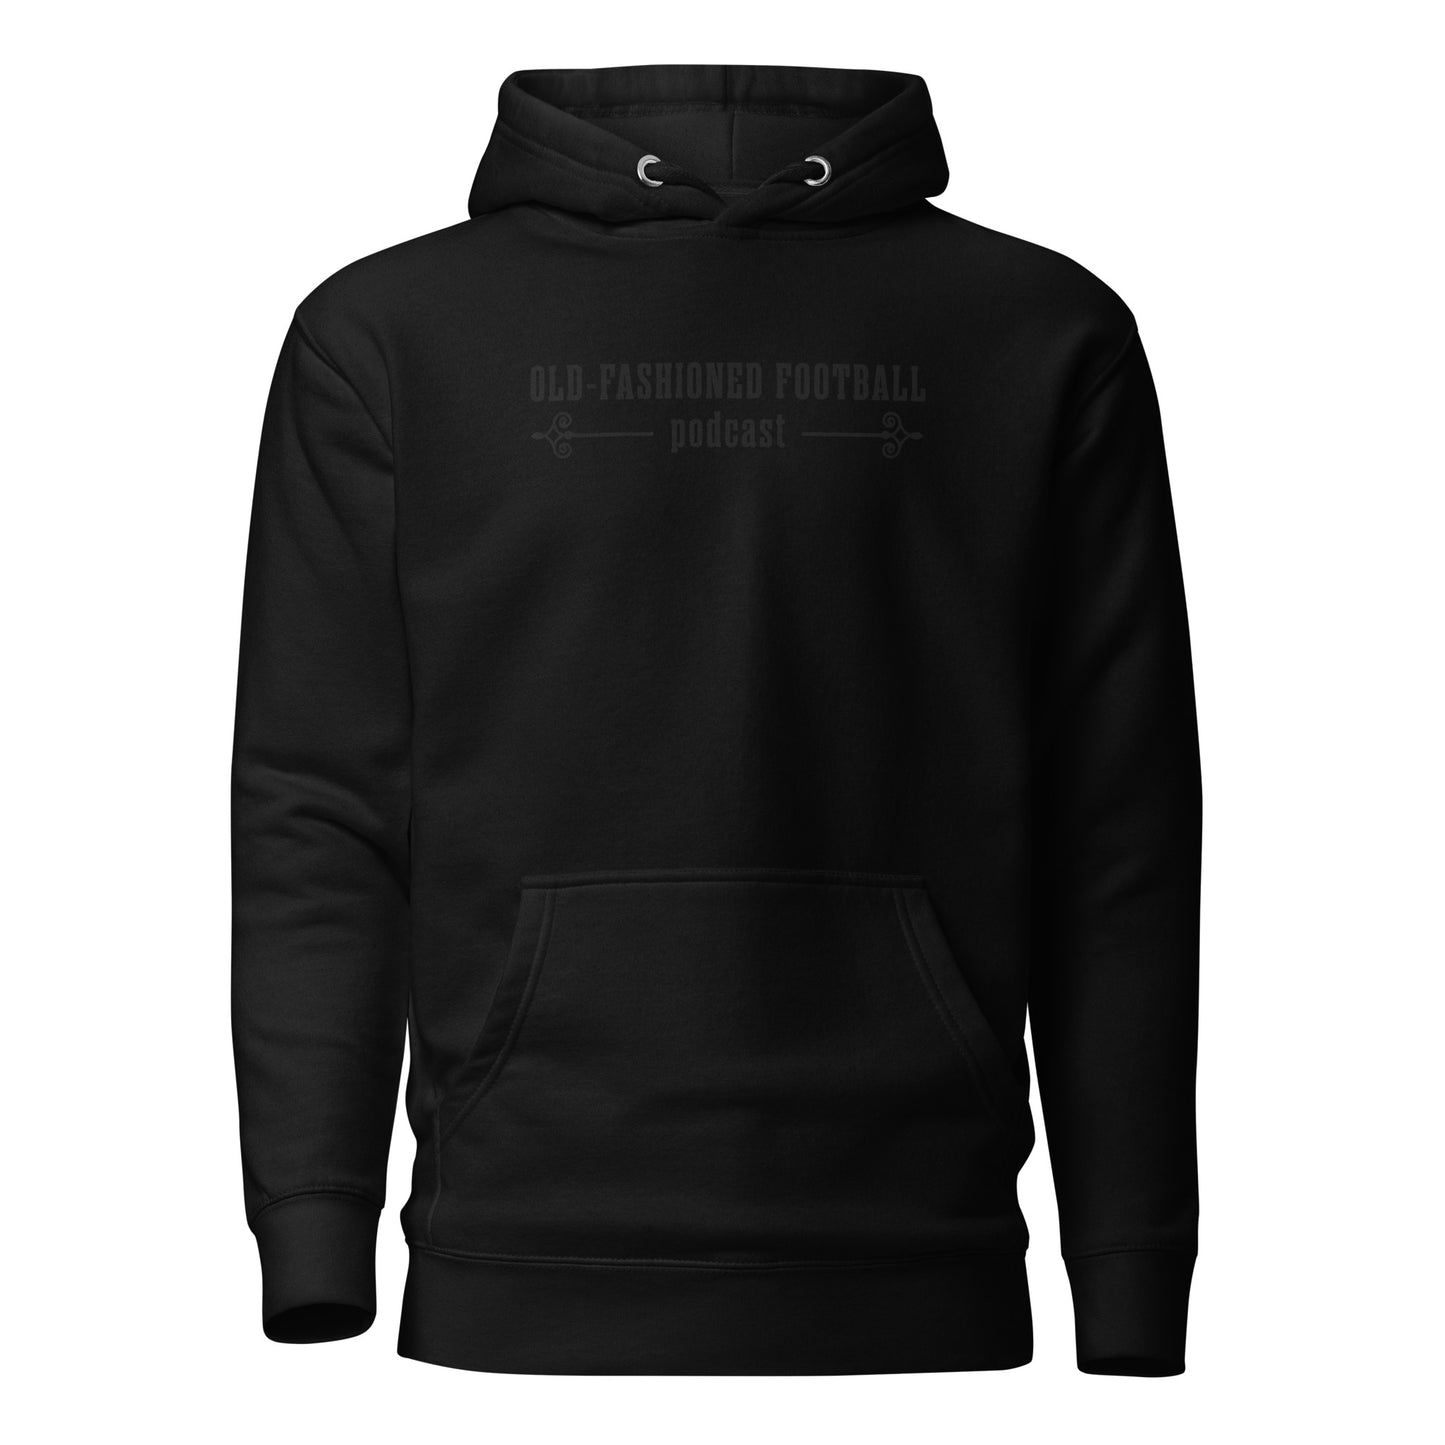 Old-Fashioned Football Podcast - SGPN Fantasy Football - Unisex Hoodie